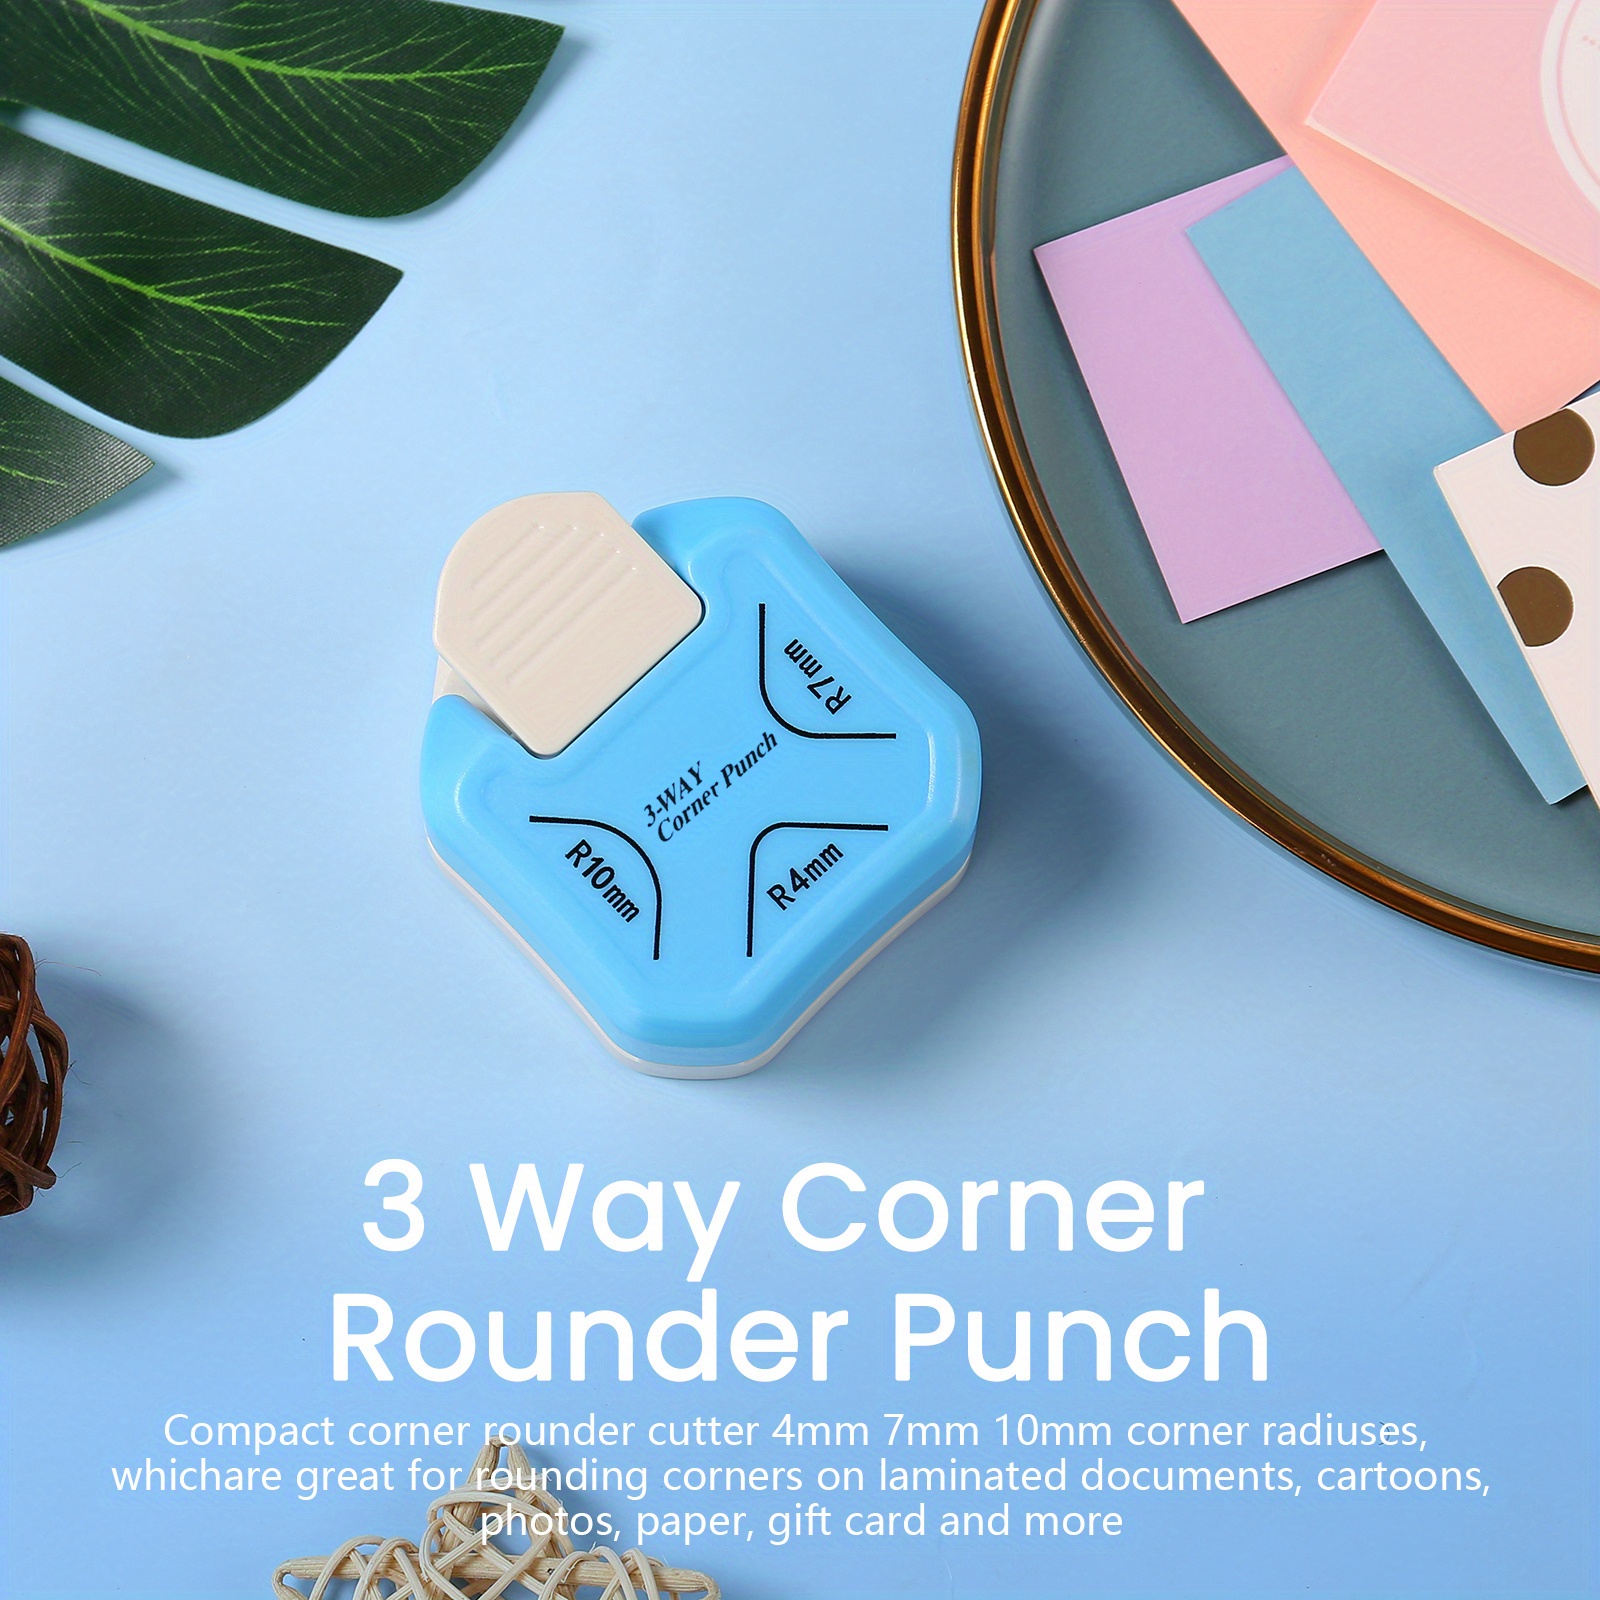 3 in 1 Corner Rounder Punch, 4mm 7mm 10mm 3 Way Corner Cutter for Paper Craft, Laminate, DIY Projects, Photo Cutter, Card Making and Scrapbooking